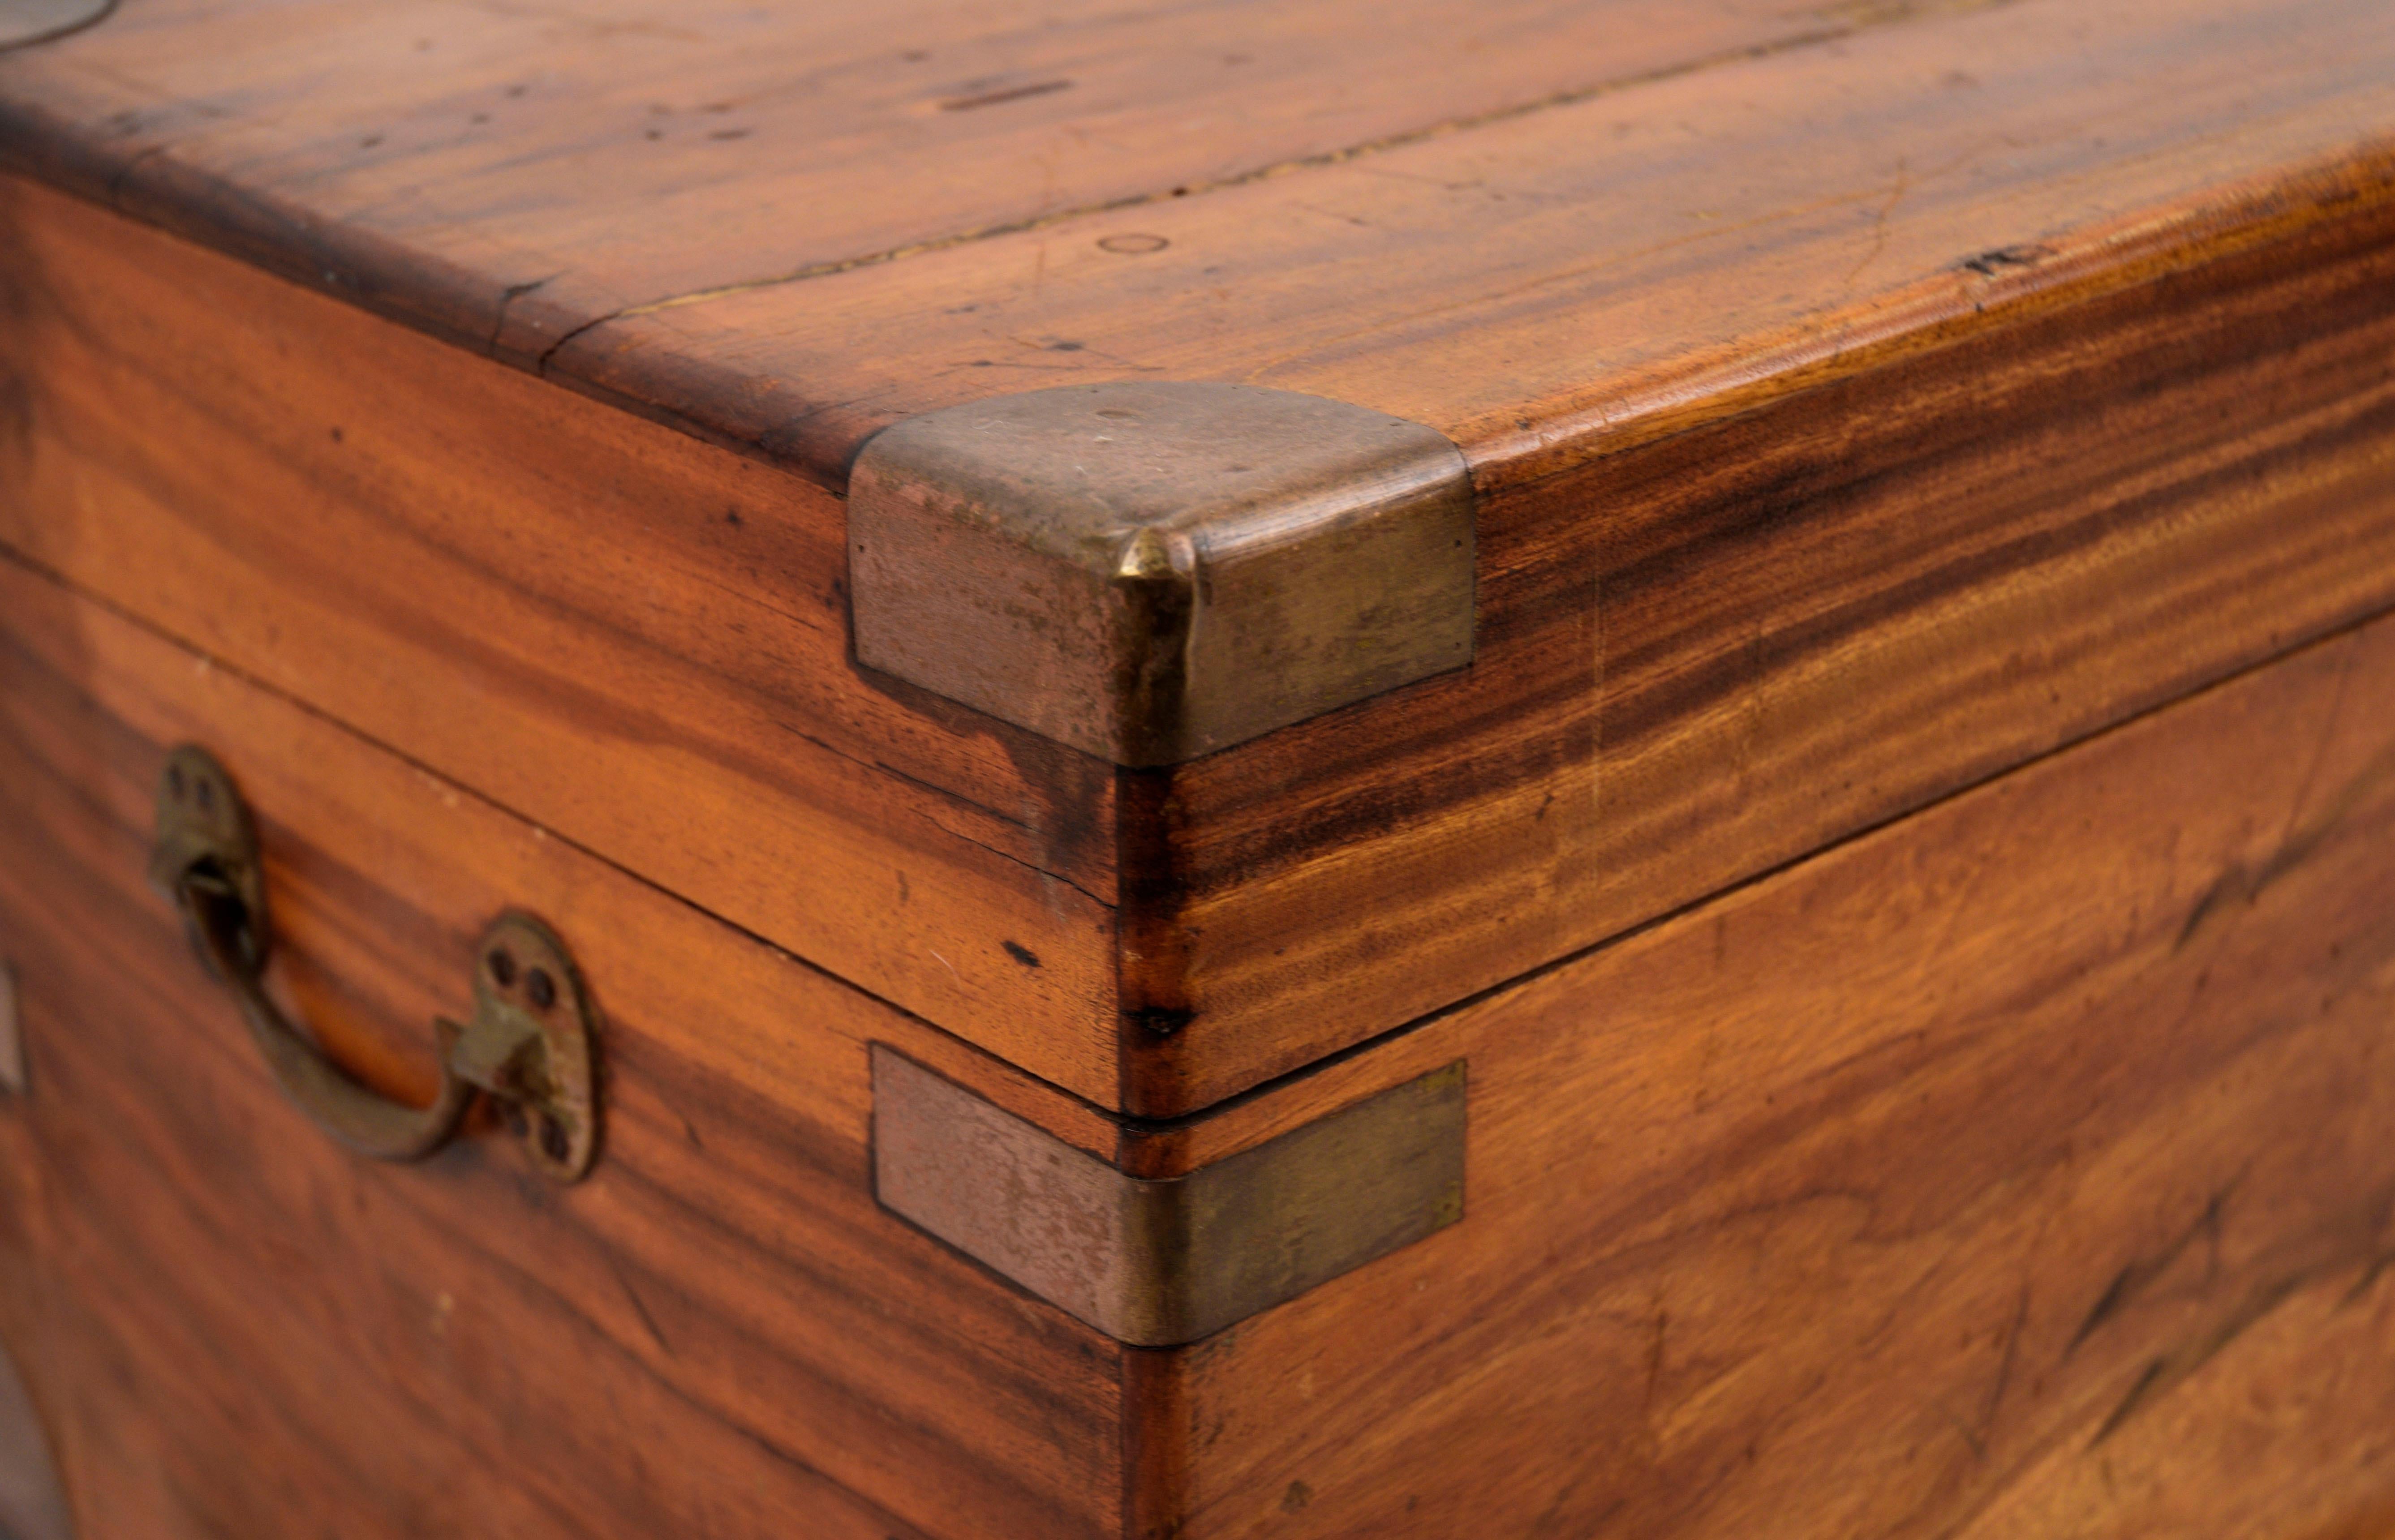 Brass Camphorwood Campaign Chest - Late 19th Century Chinese Export Case (Medium) For Sale